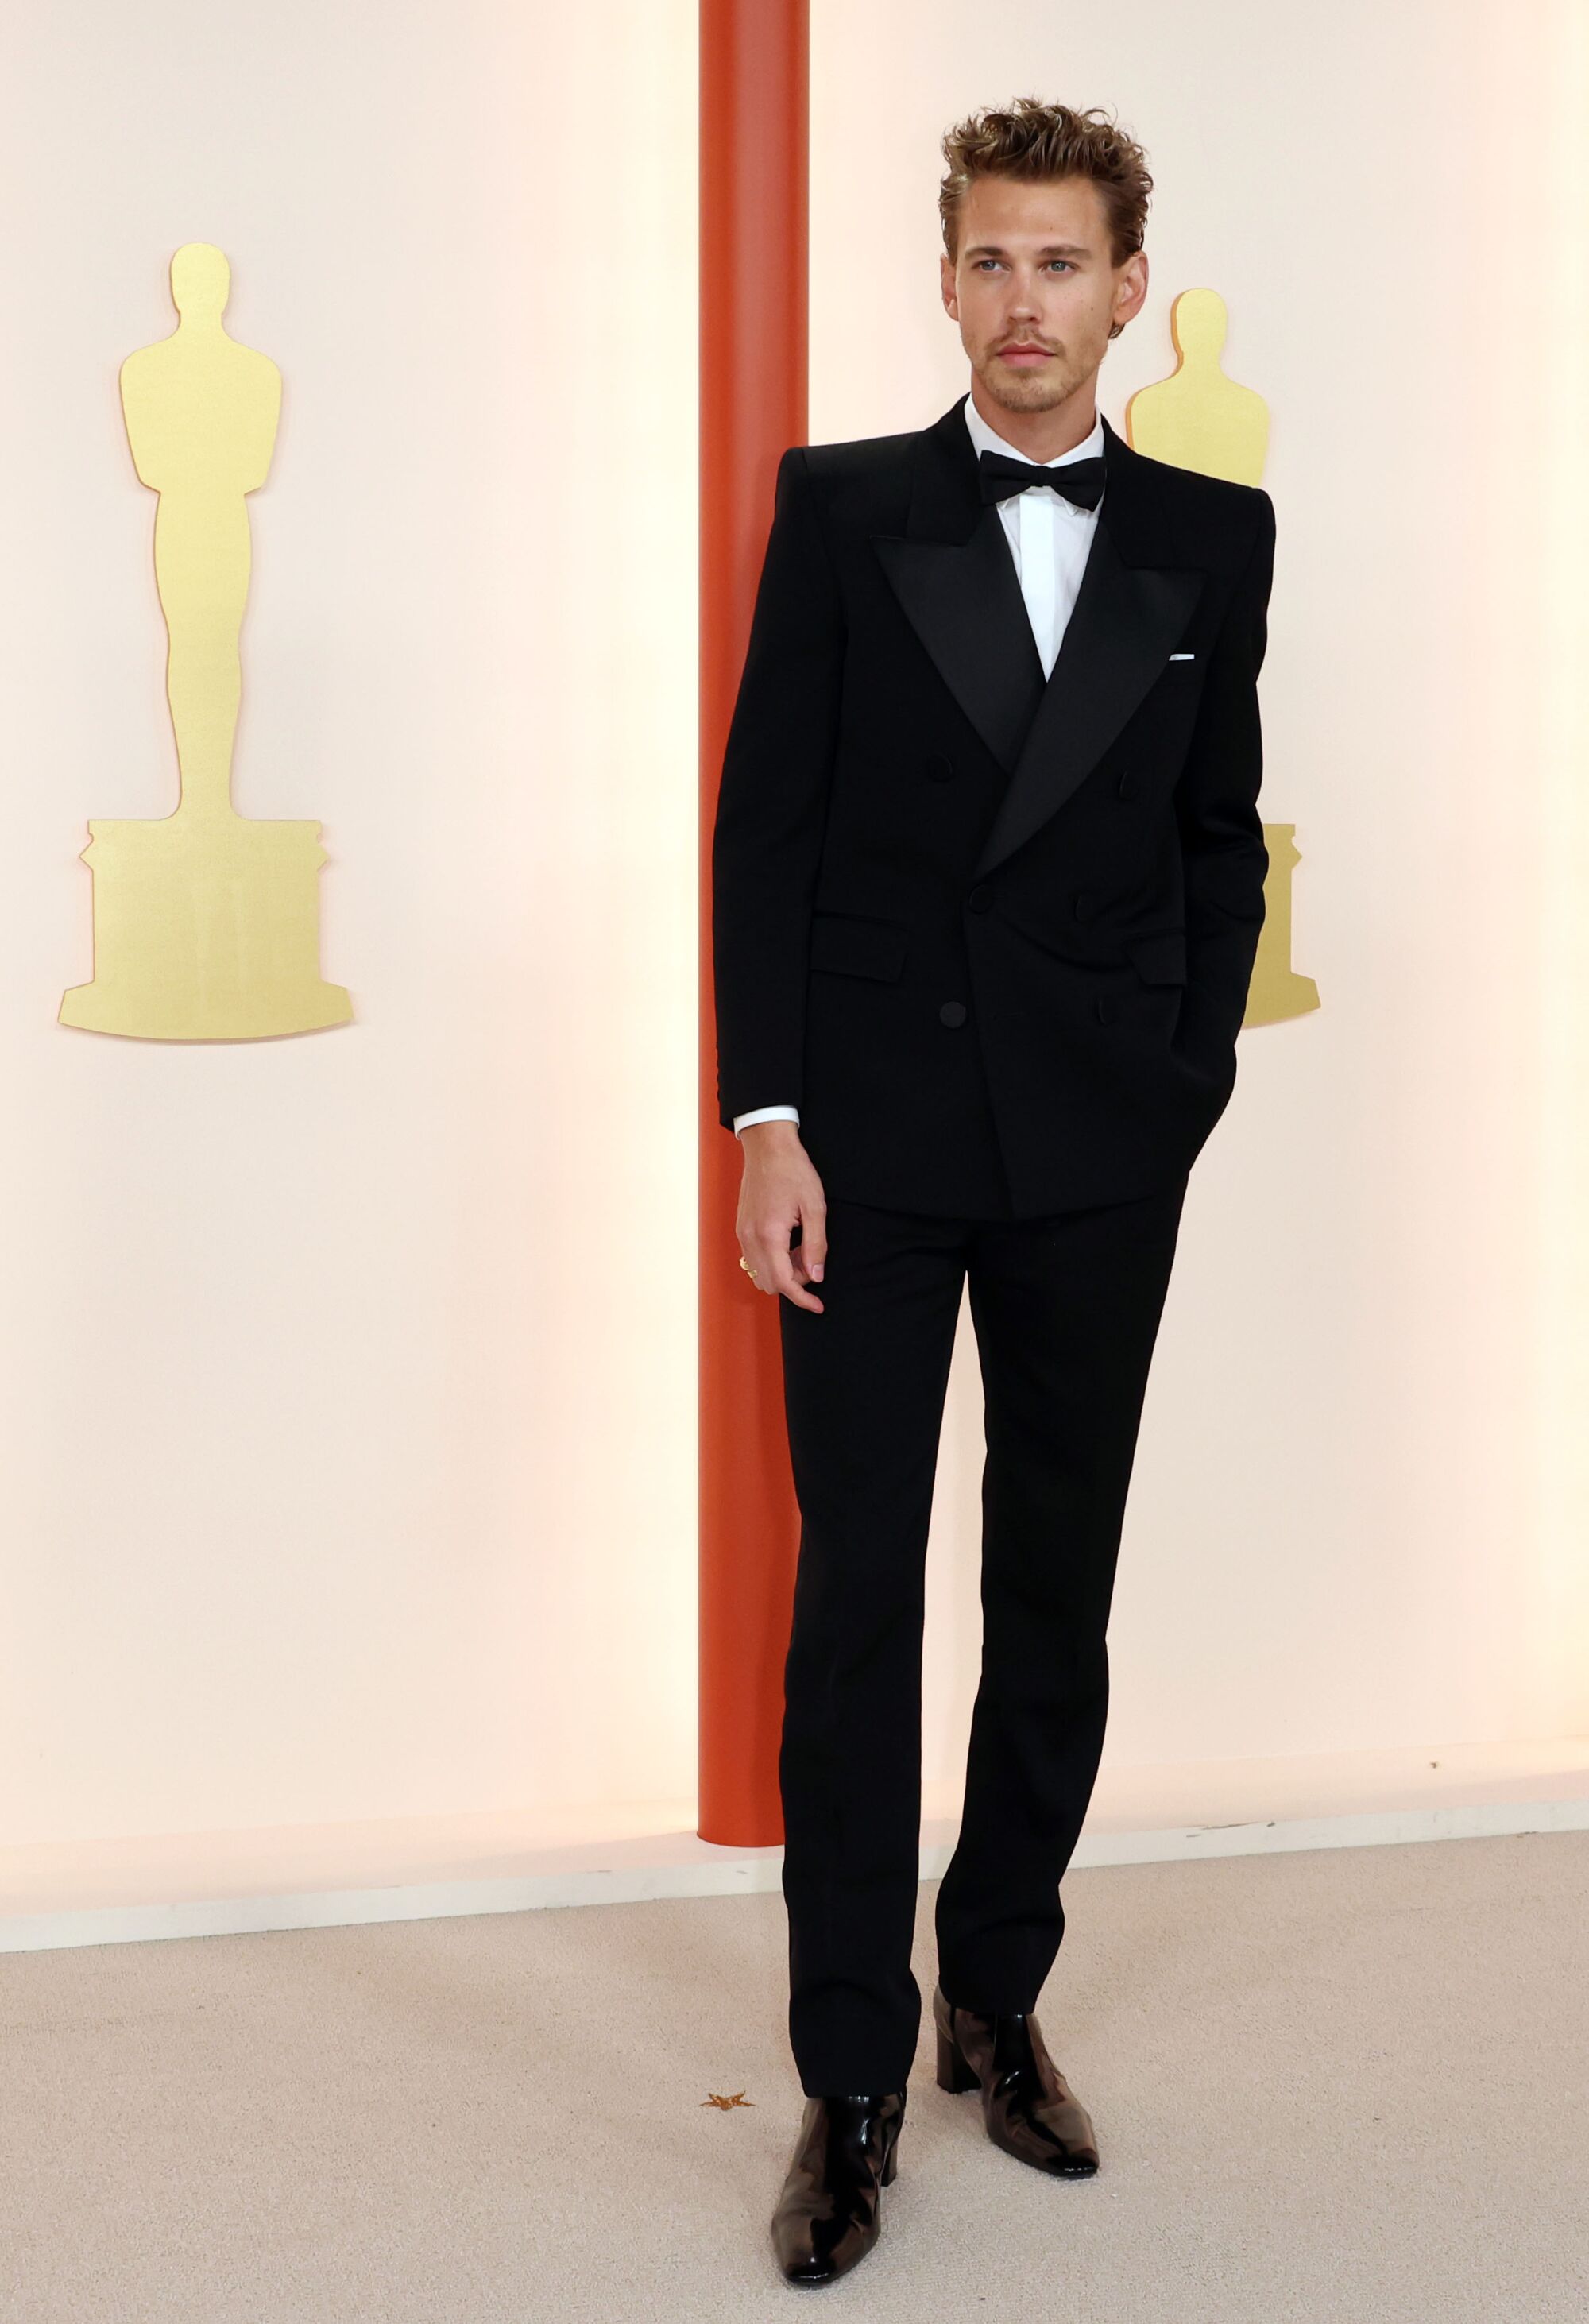 Austin Butler on the red carpet at the 2023 Oscars.